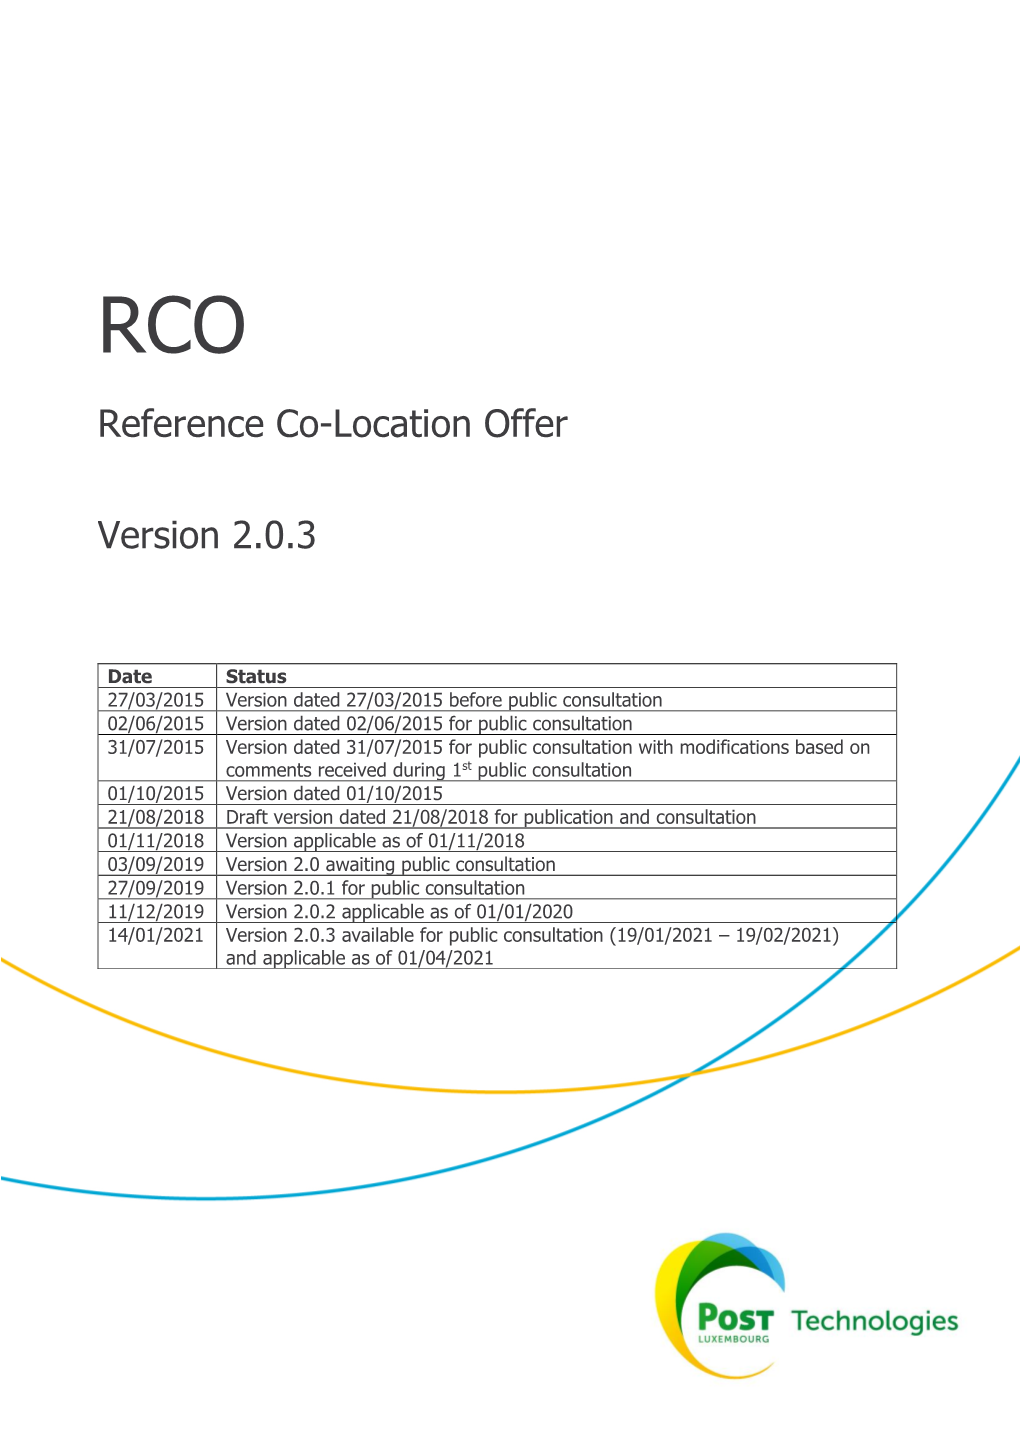 Reference Co-Location Offer Version 2.0.3